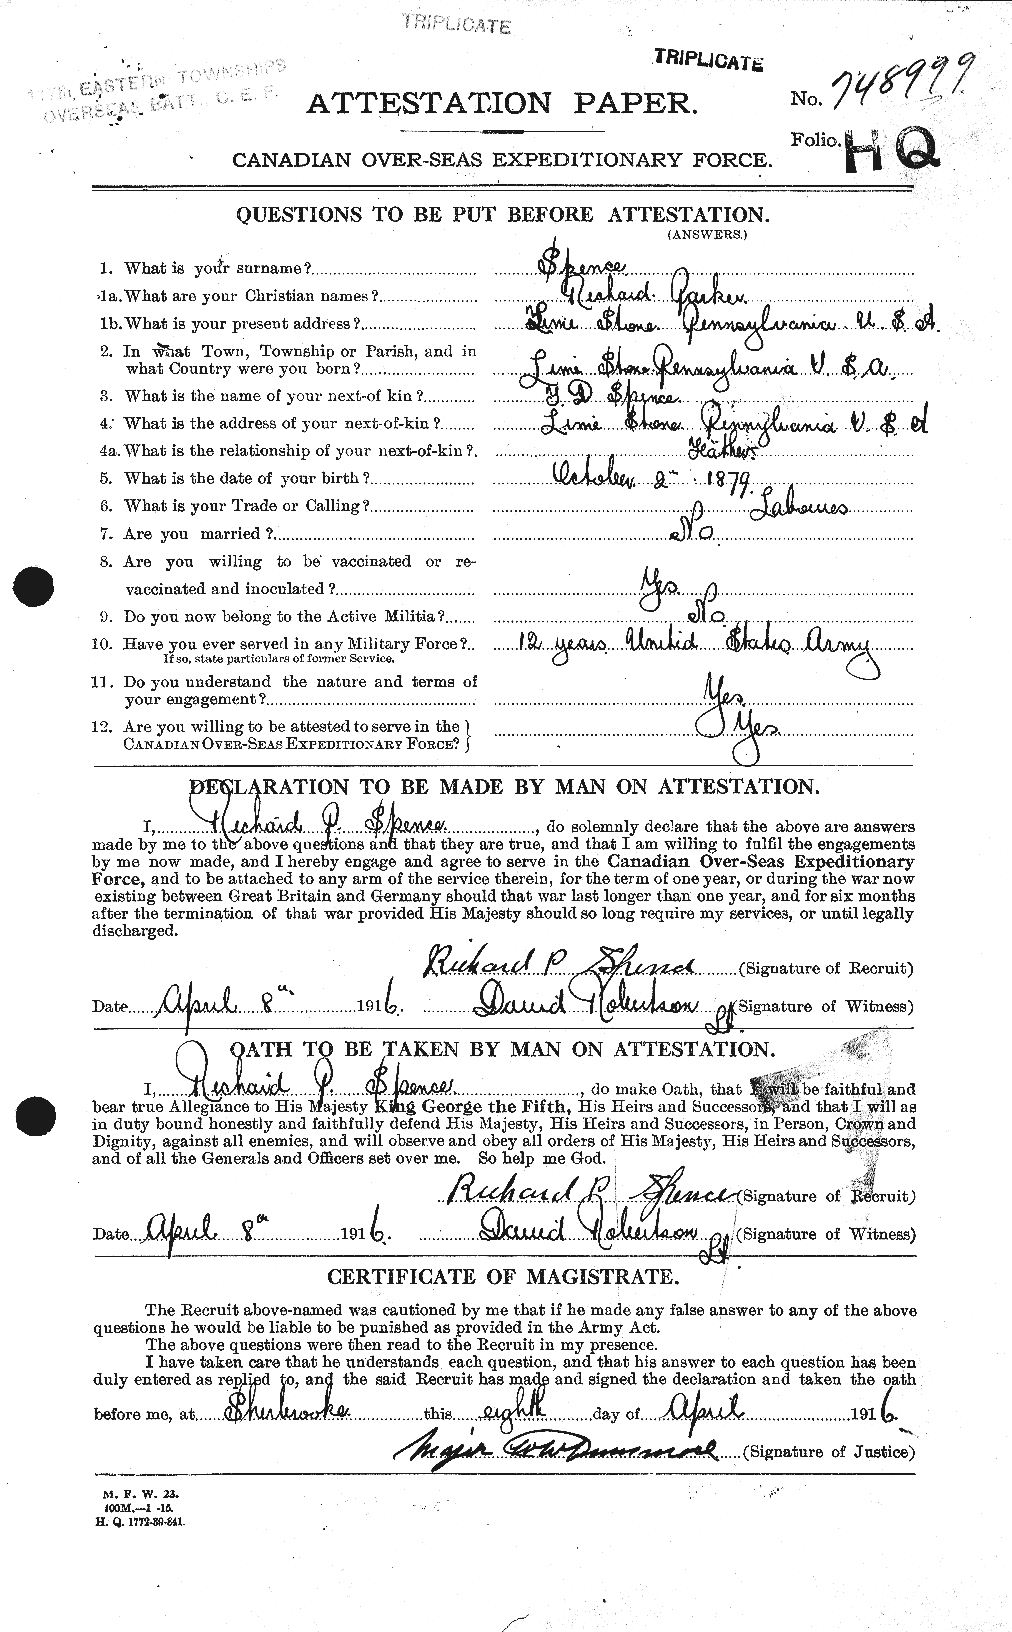 Personnel Records of the First World War - CEF 621410a